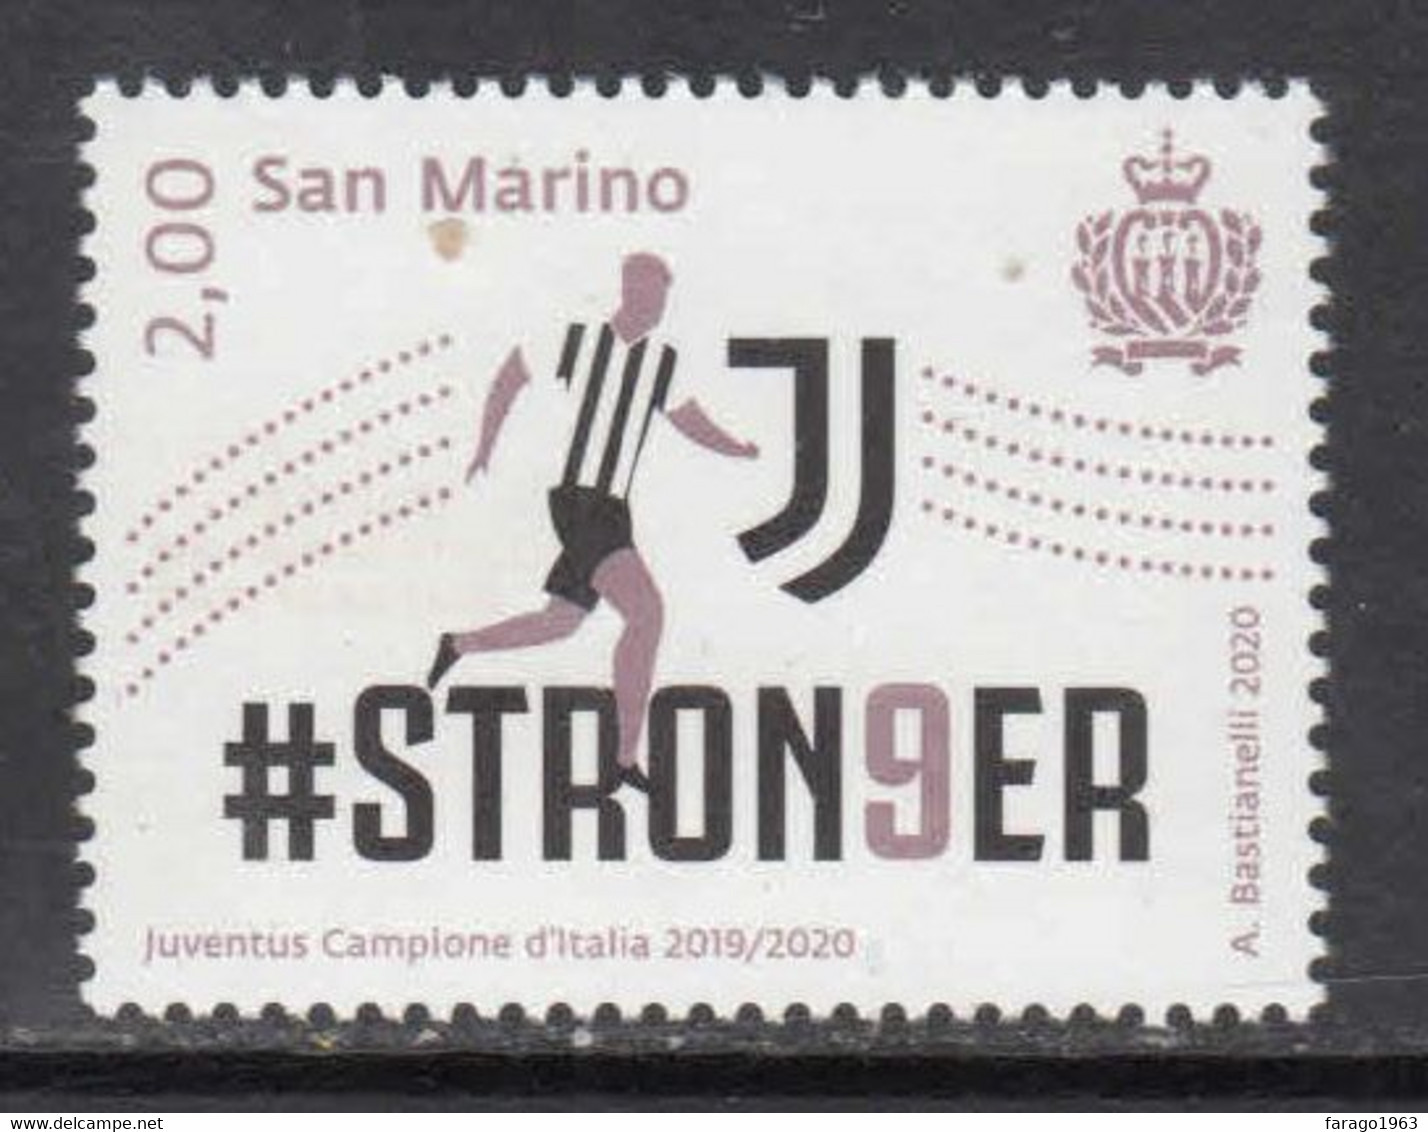 2020 San Marino Juventus Football Complete Set Of 1  MNH @ BELOW FACE VALUE - Unused Stamps